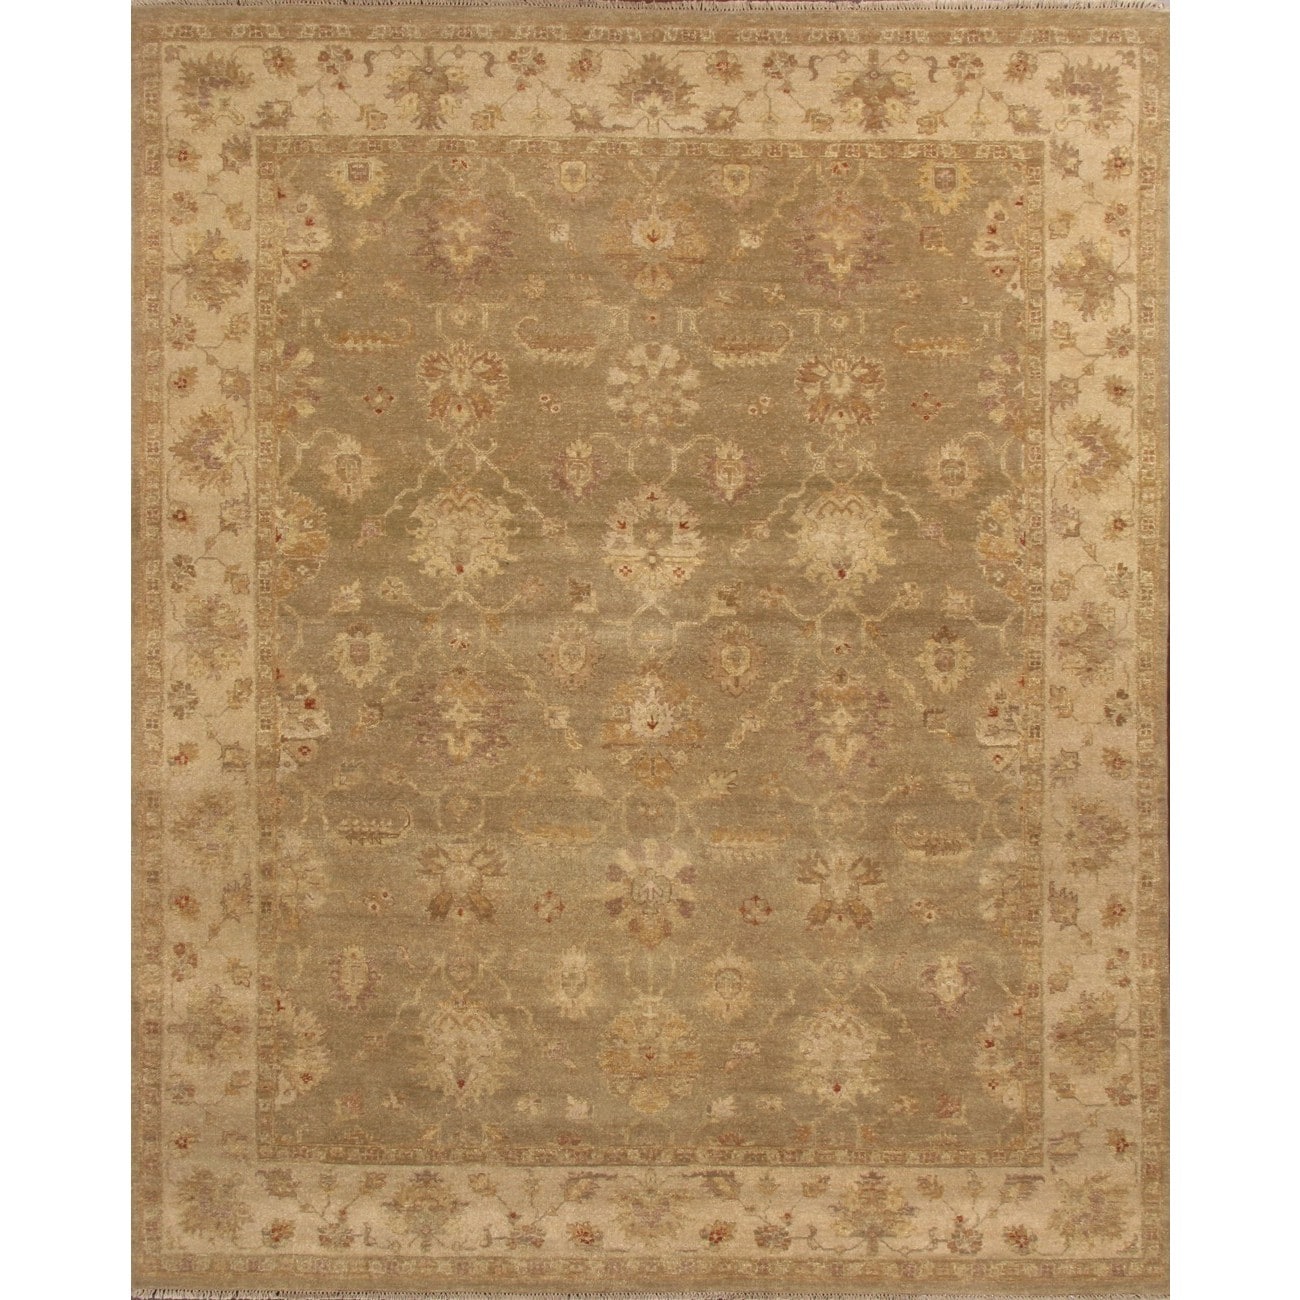 Hand Knotted Ziegler Green Beige Vegetable Dyes Wool Rug (10 X 14)